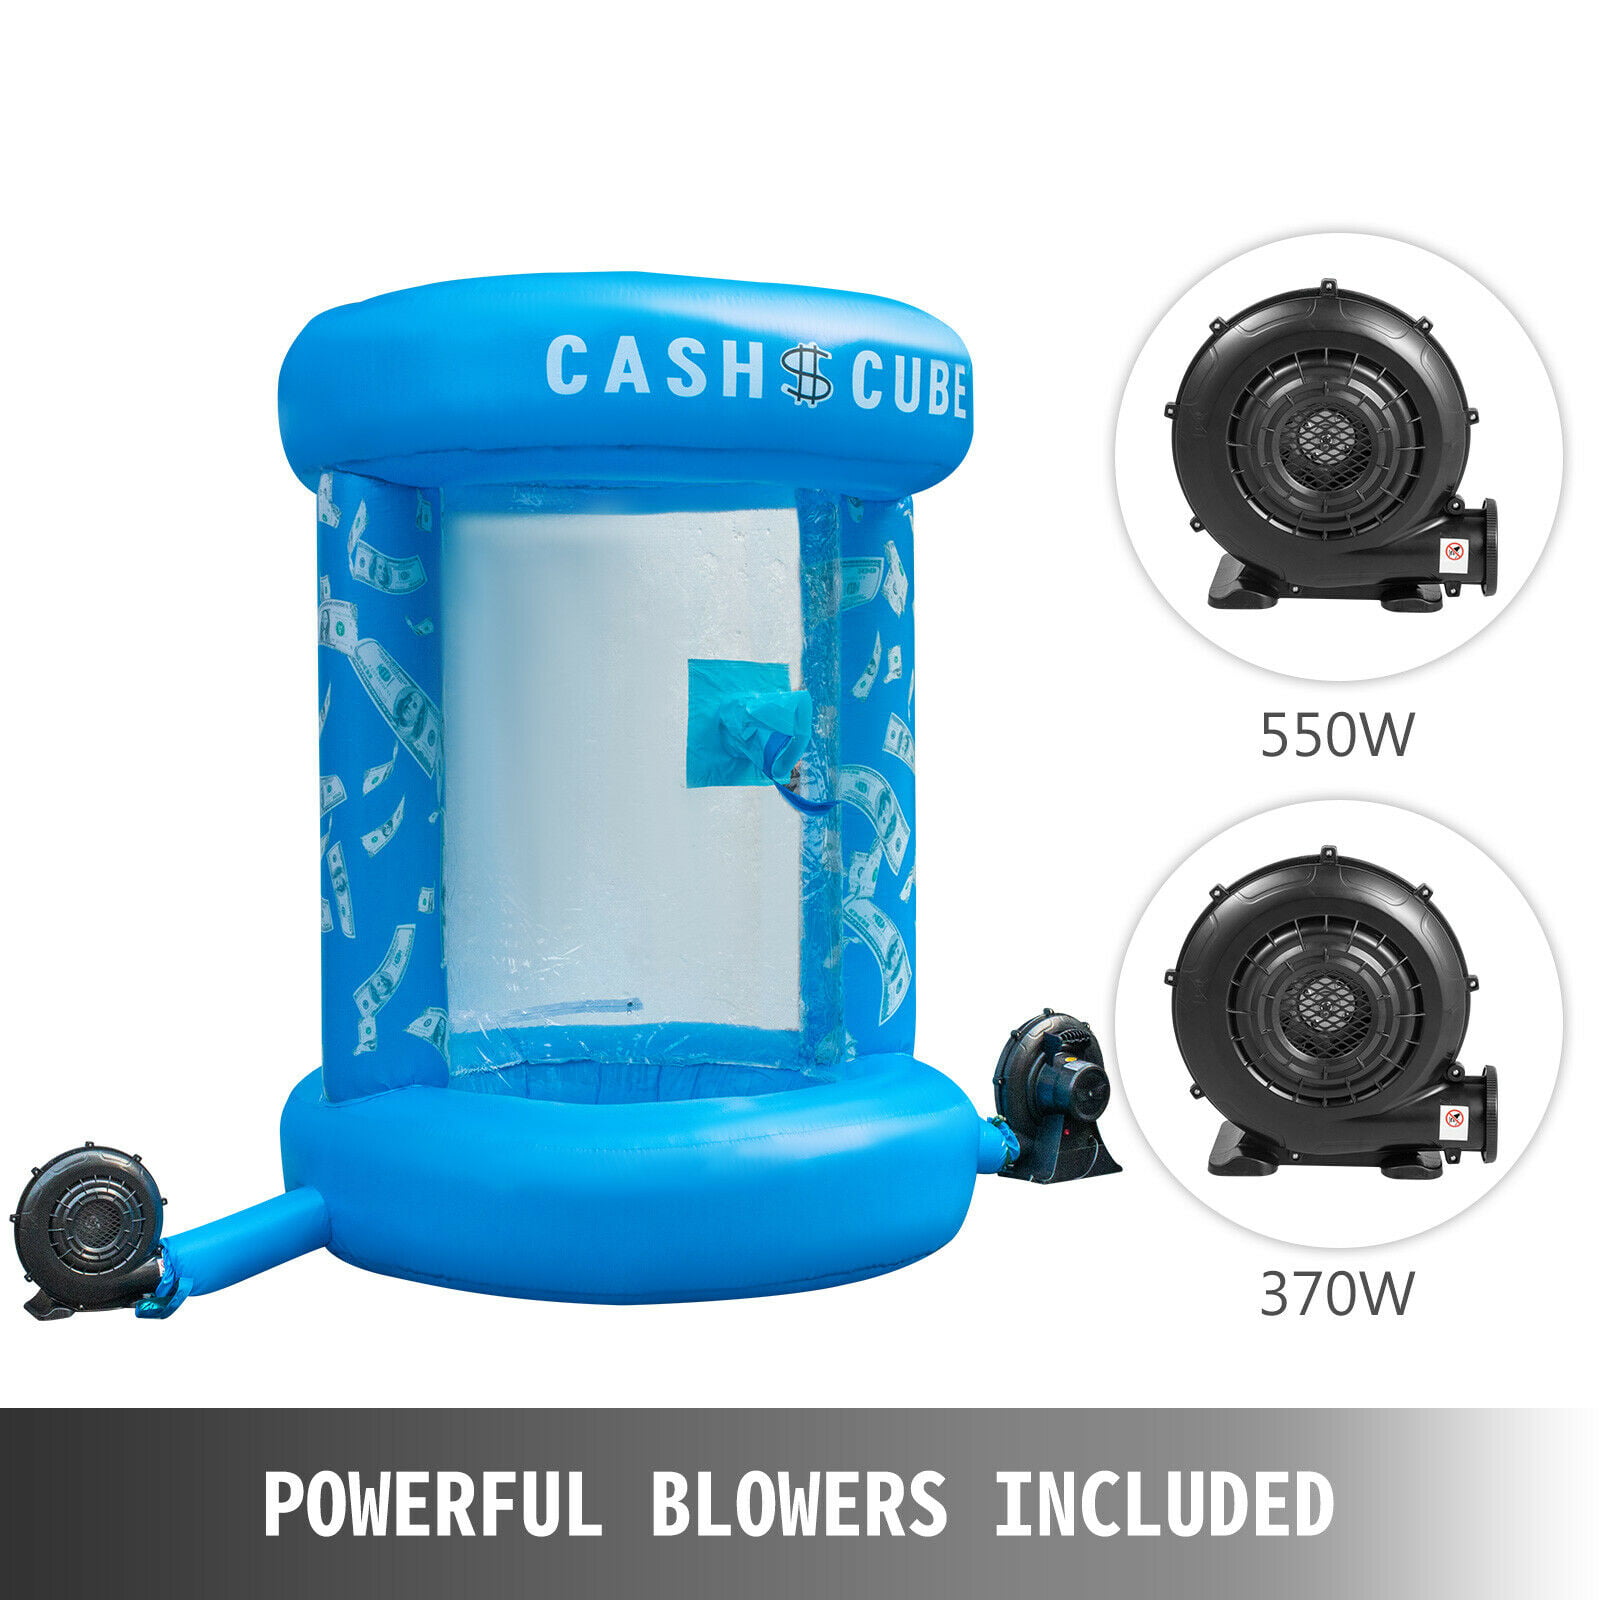 5.3x6.9ft Inflatable Cash Cube Money Machine Advertising Promotion 2 Air Blower 